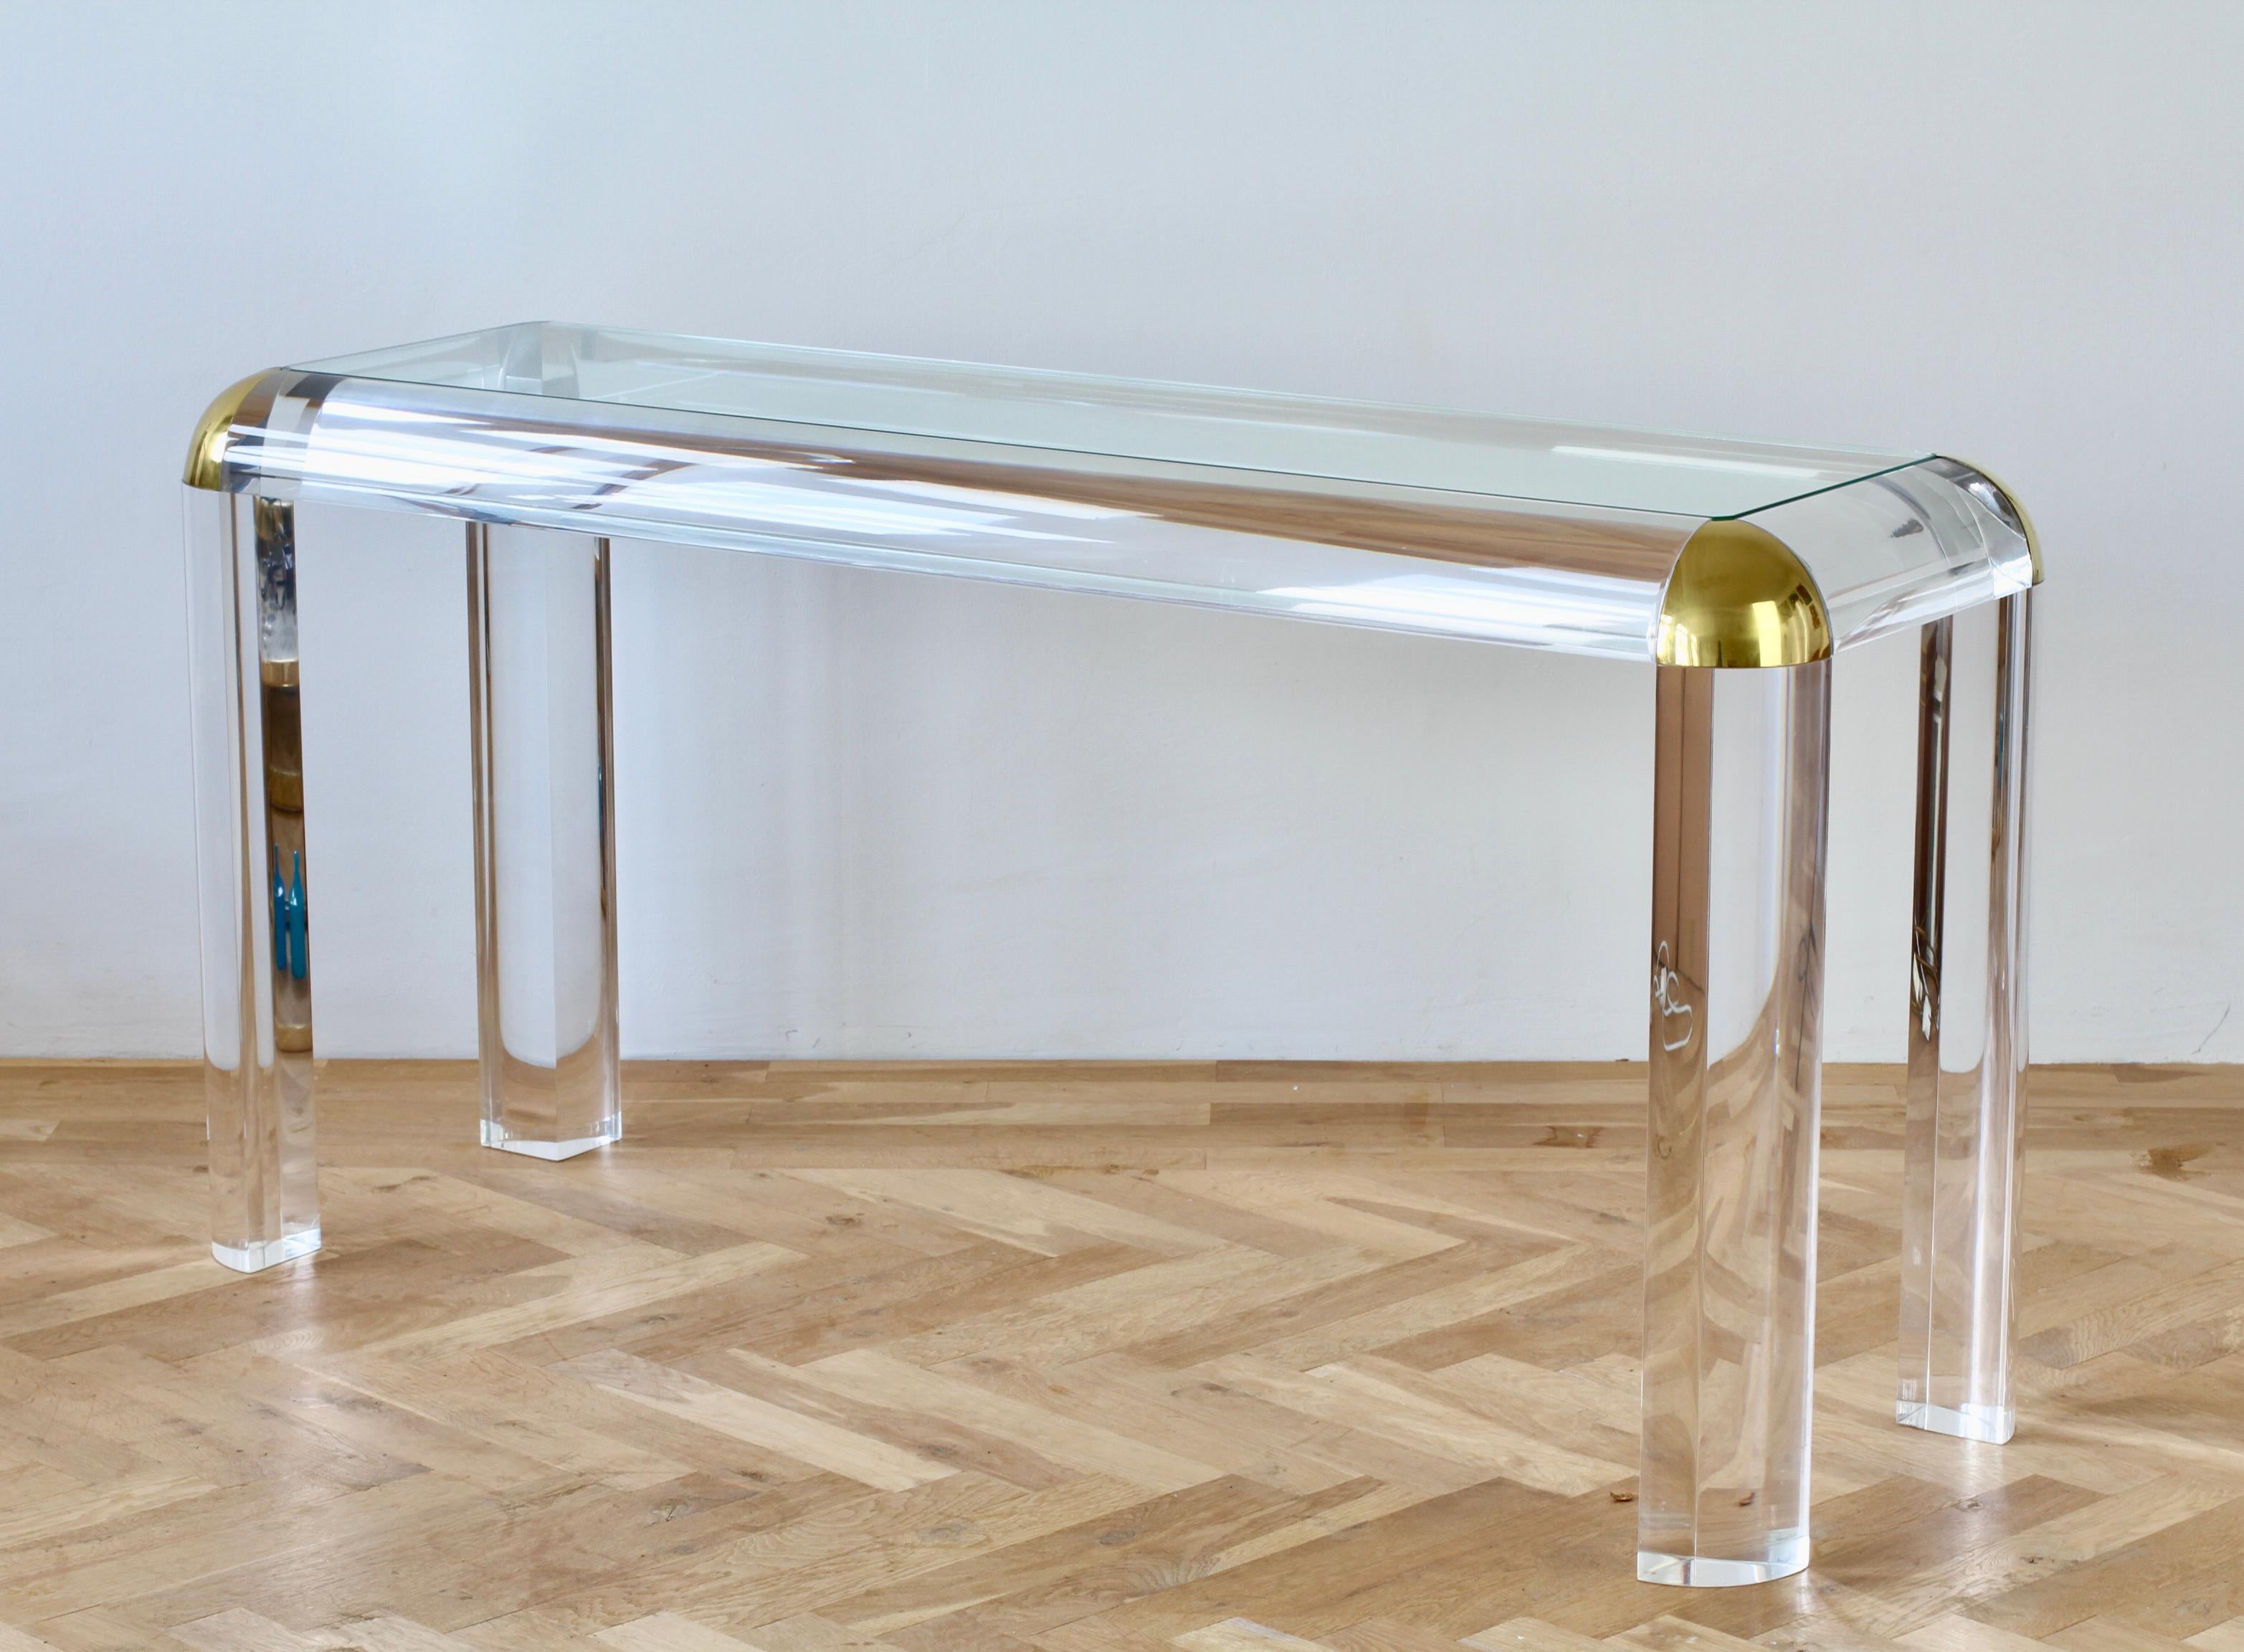 Refurbished vintage Mid-Century Modern Karl Springer style huge five foot long (150cm) and tall console, sofa, foyer or entrance table made of Lucite / acrylic with glass tabletop with brass trim and angled corners, circa 1980s. The heavy and thick